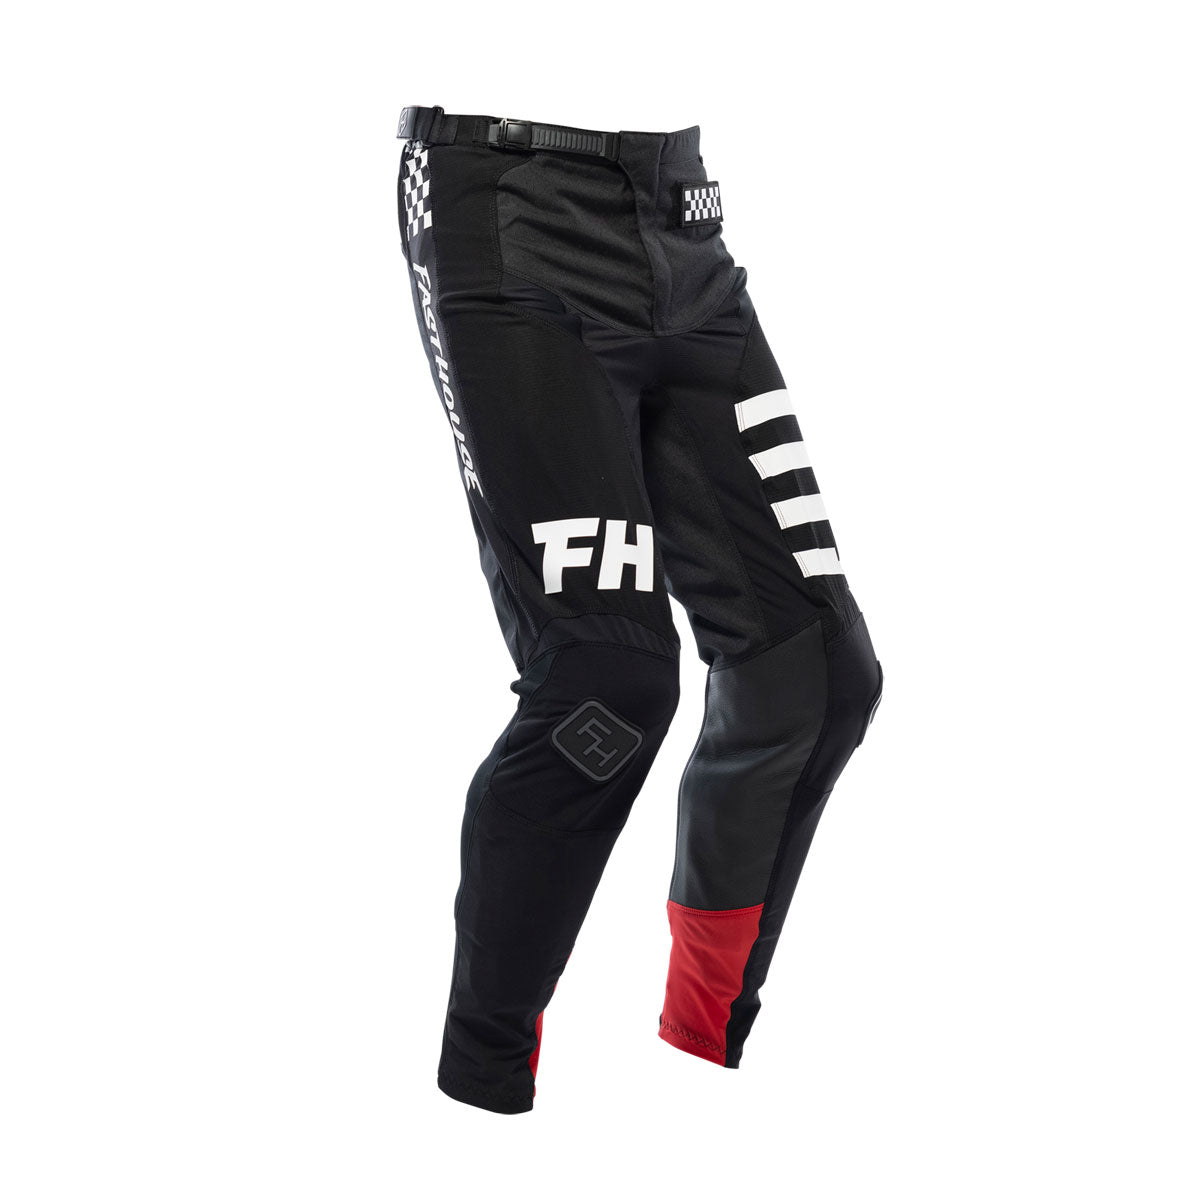 A/C Elrod Youth Pant - Black